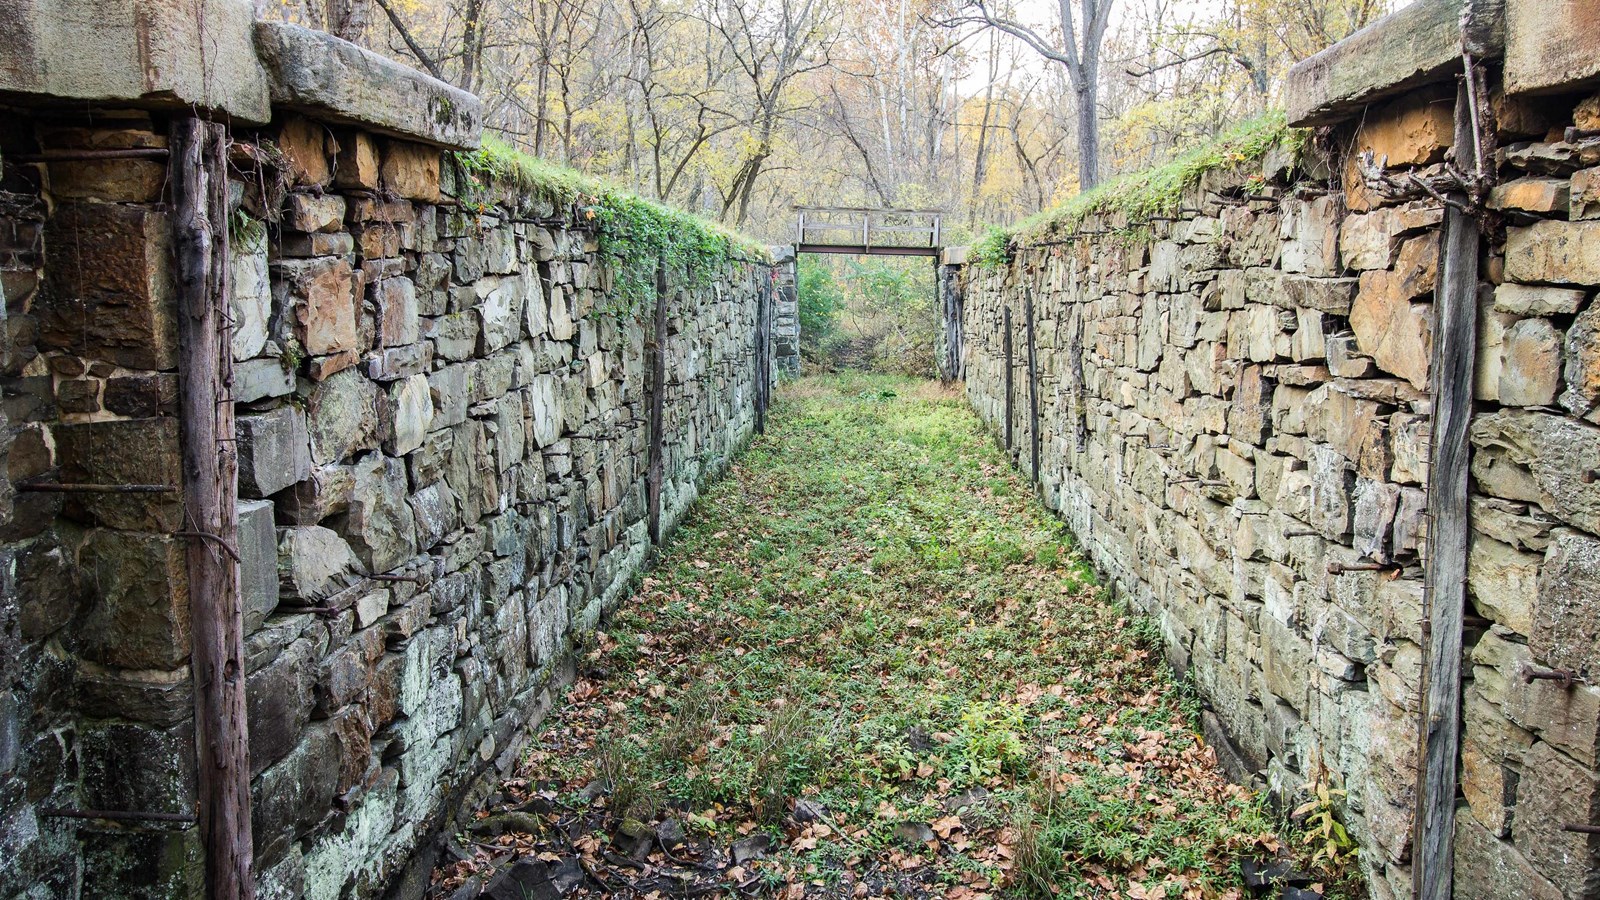 A look through a lock, with long stone walls stretching up on the right and left.